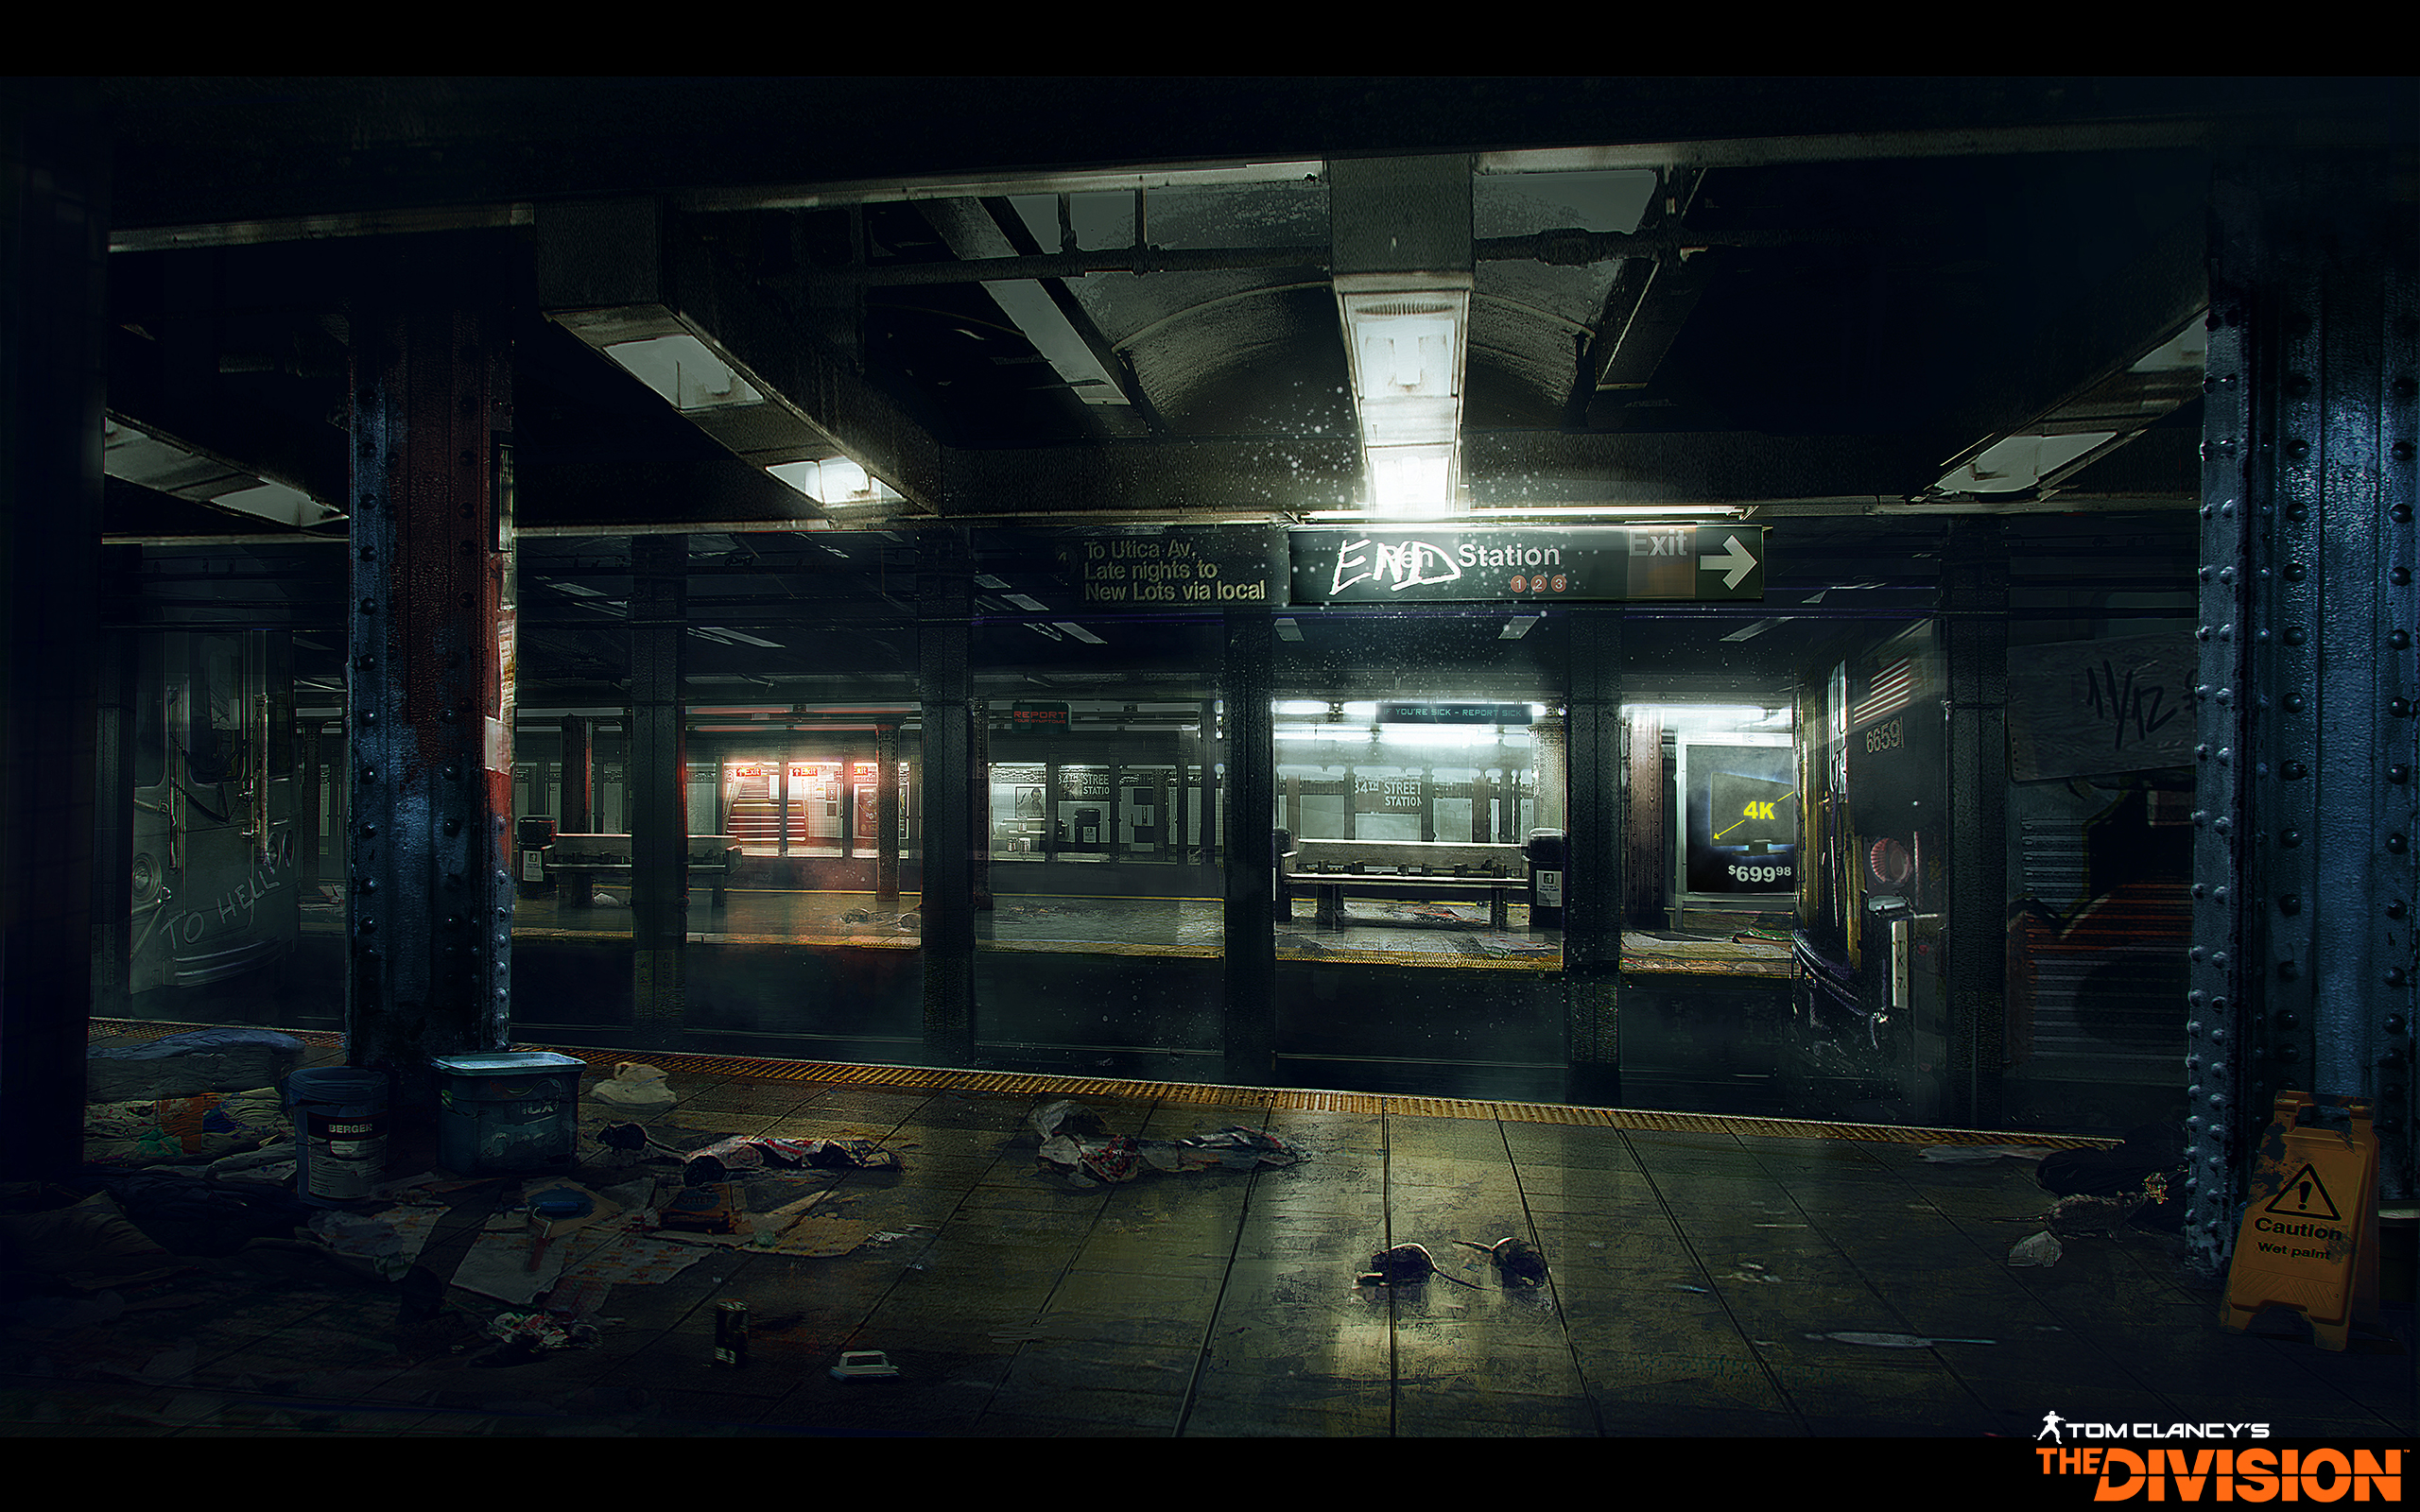 Tom Clancy 039 S The Division Train Station 2560x1600